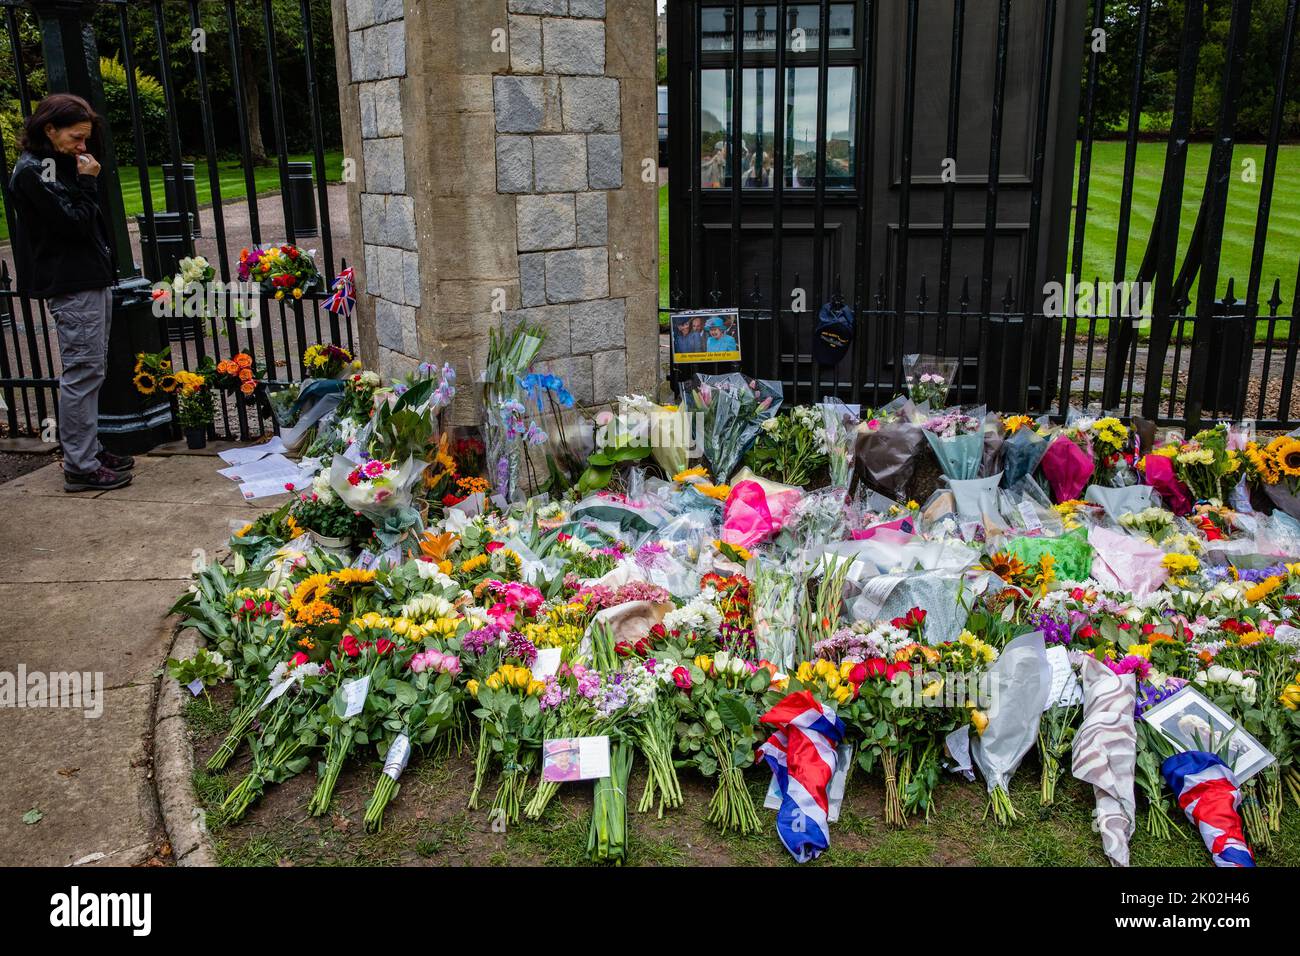 Windsor, UK. 9th Sep, 2022. Floral tributes are displayed outside Cambridge Gate at Windsor Castle a day after the death of Queen Elizabeth II. Queen Elizabeth II, the UK's longest-serving monarch, died at Balmoral aged 96 after a reign lasting 70 years. Credit: Mark Kerrison/Alamy Live News Stock Photo